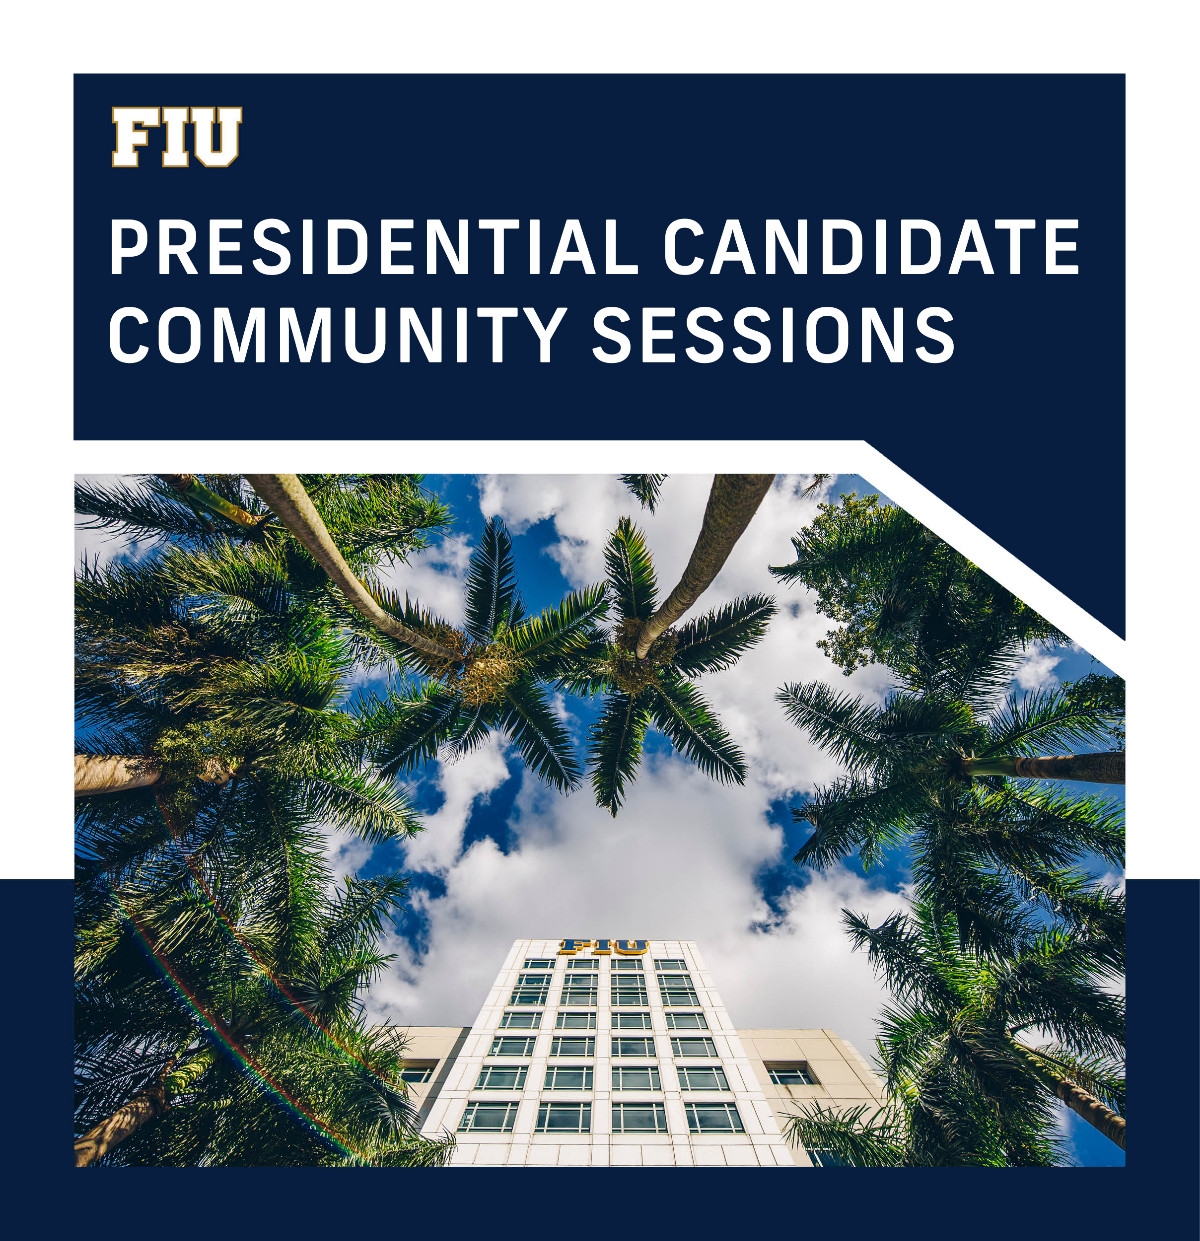 FIU Presidential Candidate Community Sessions